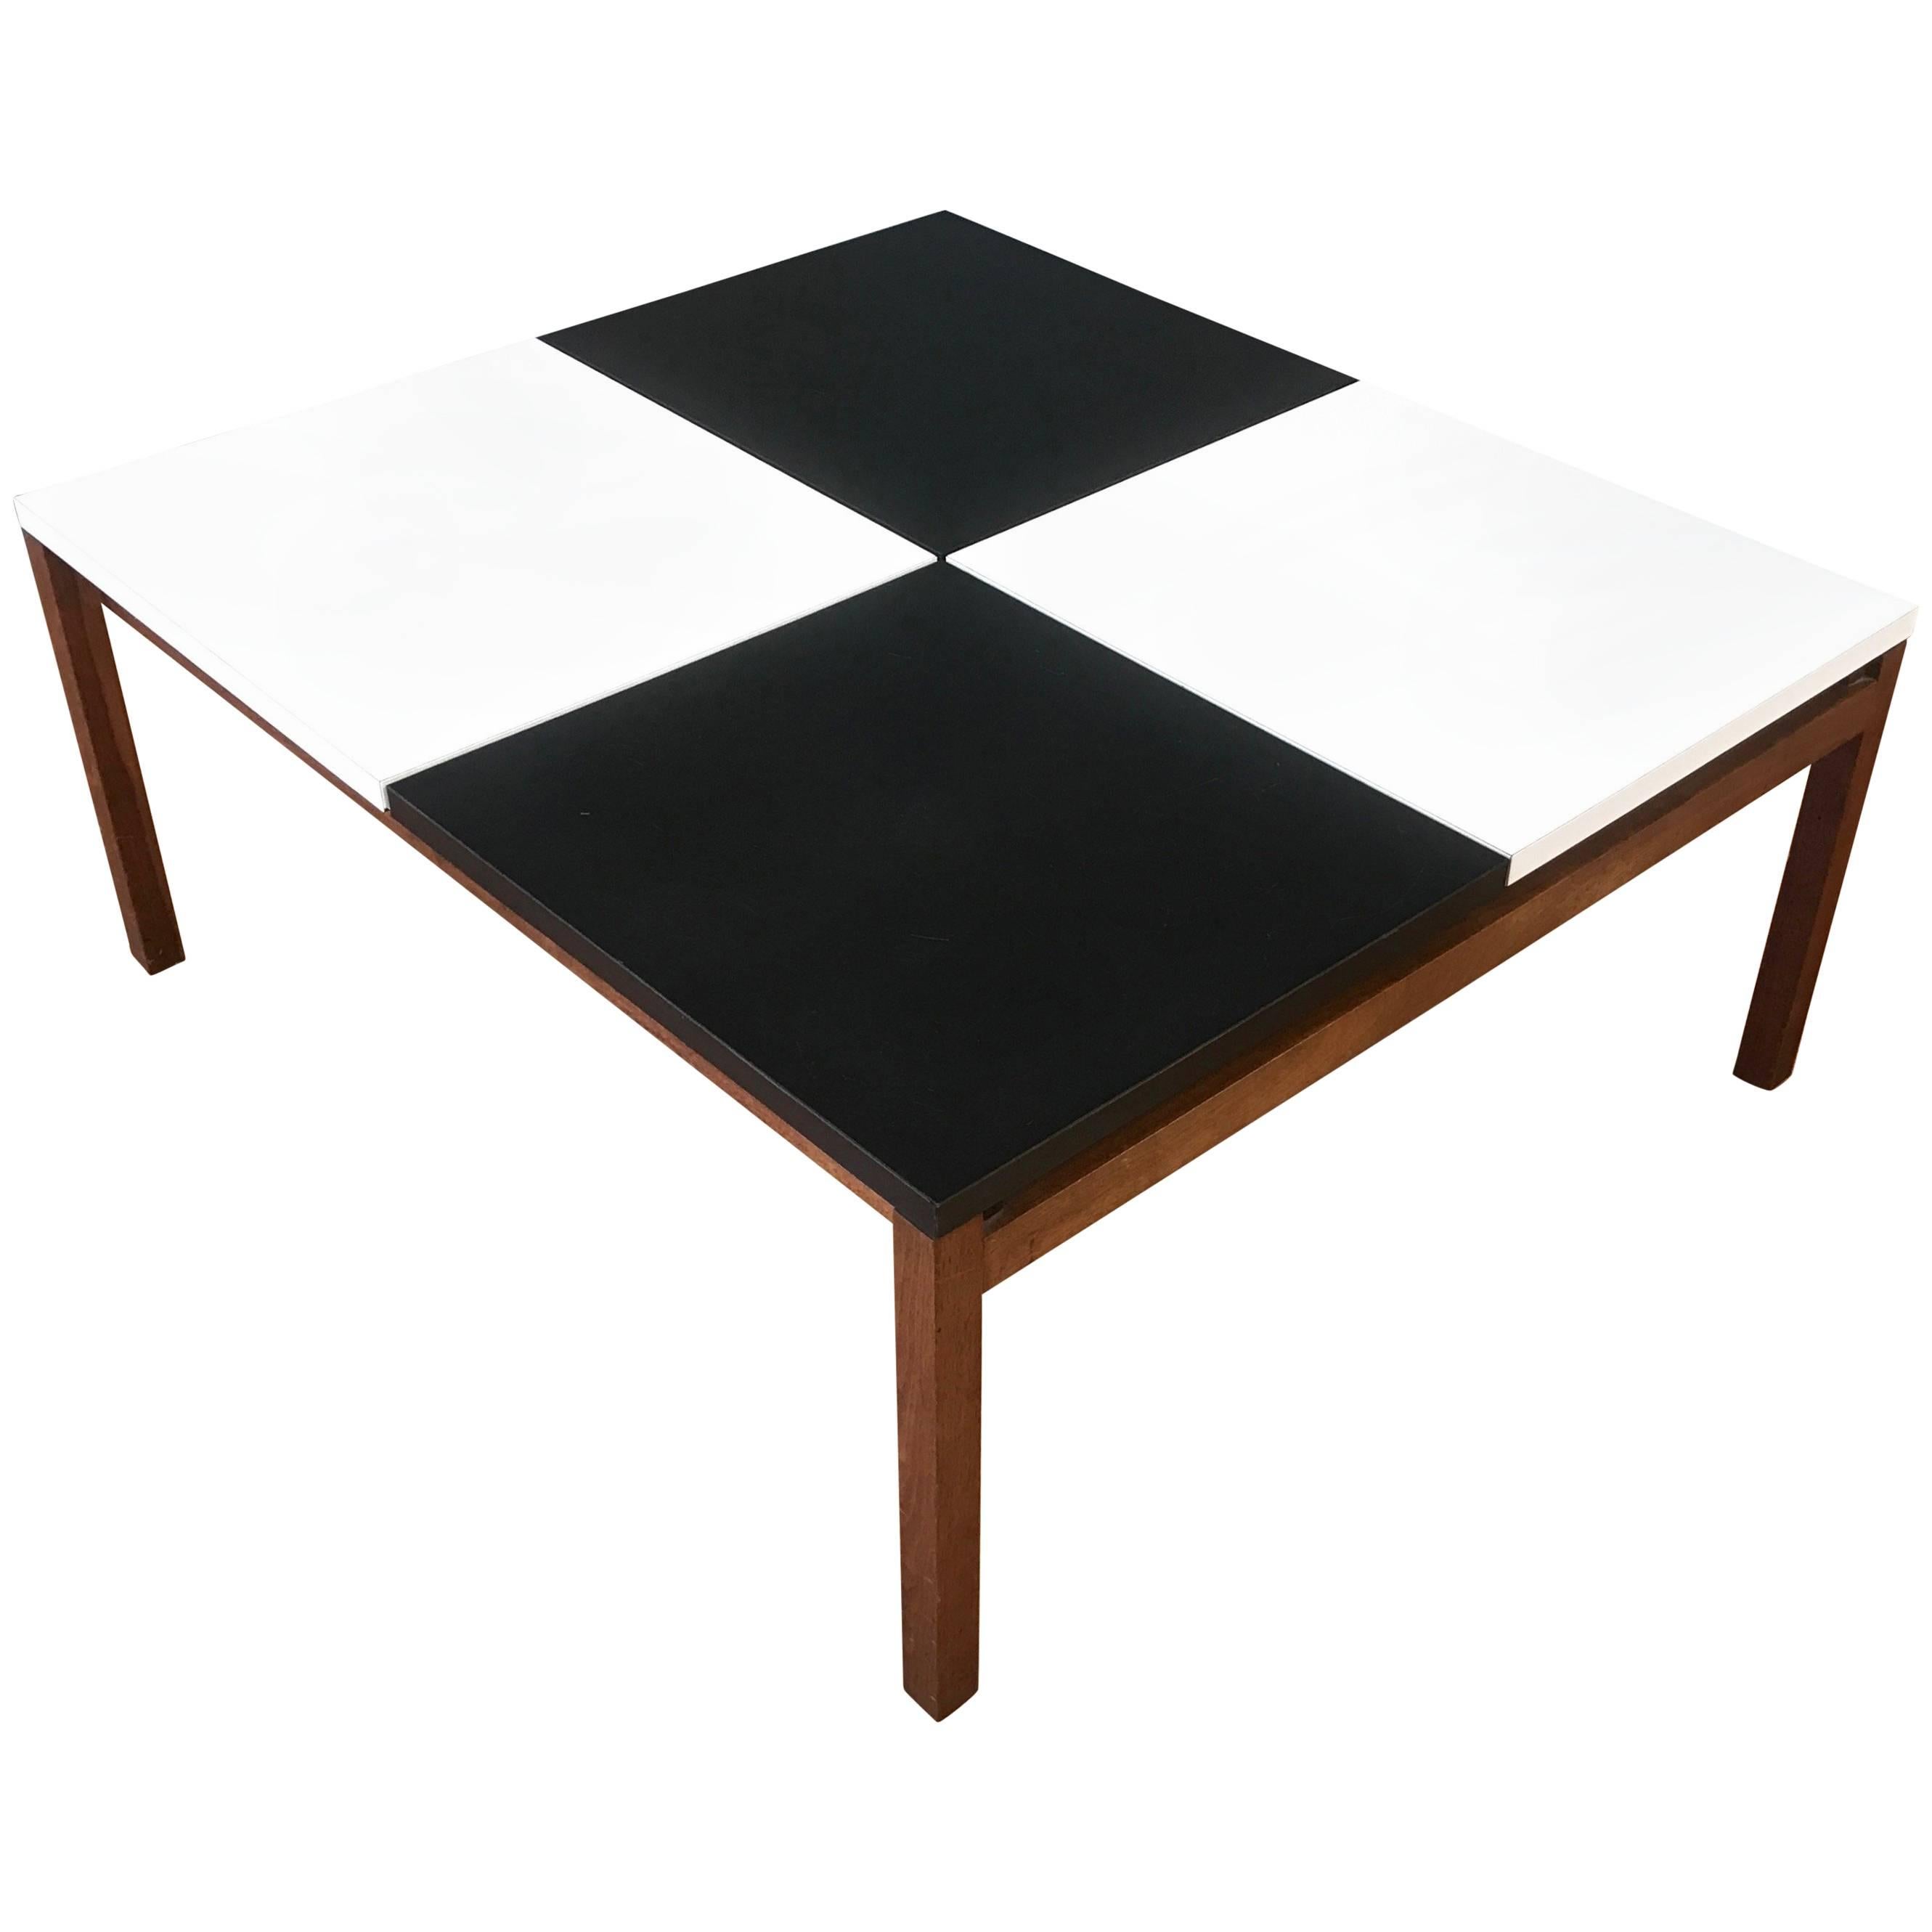 Early Lewis Butler for Knoll Associates Checkerboard Coffee Table